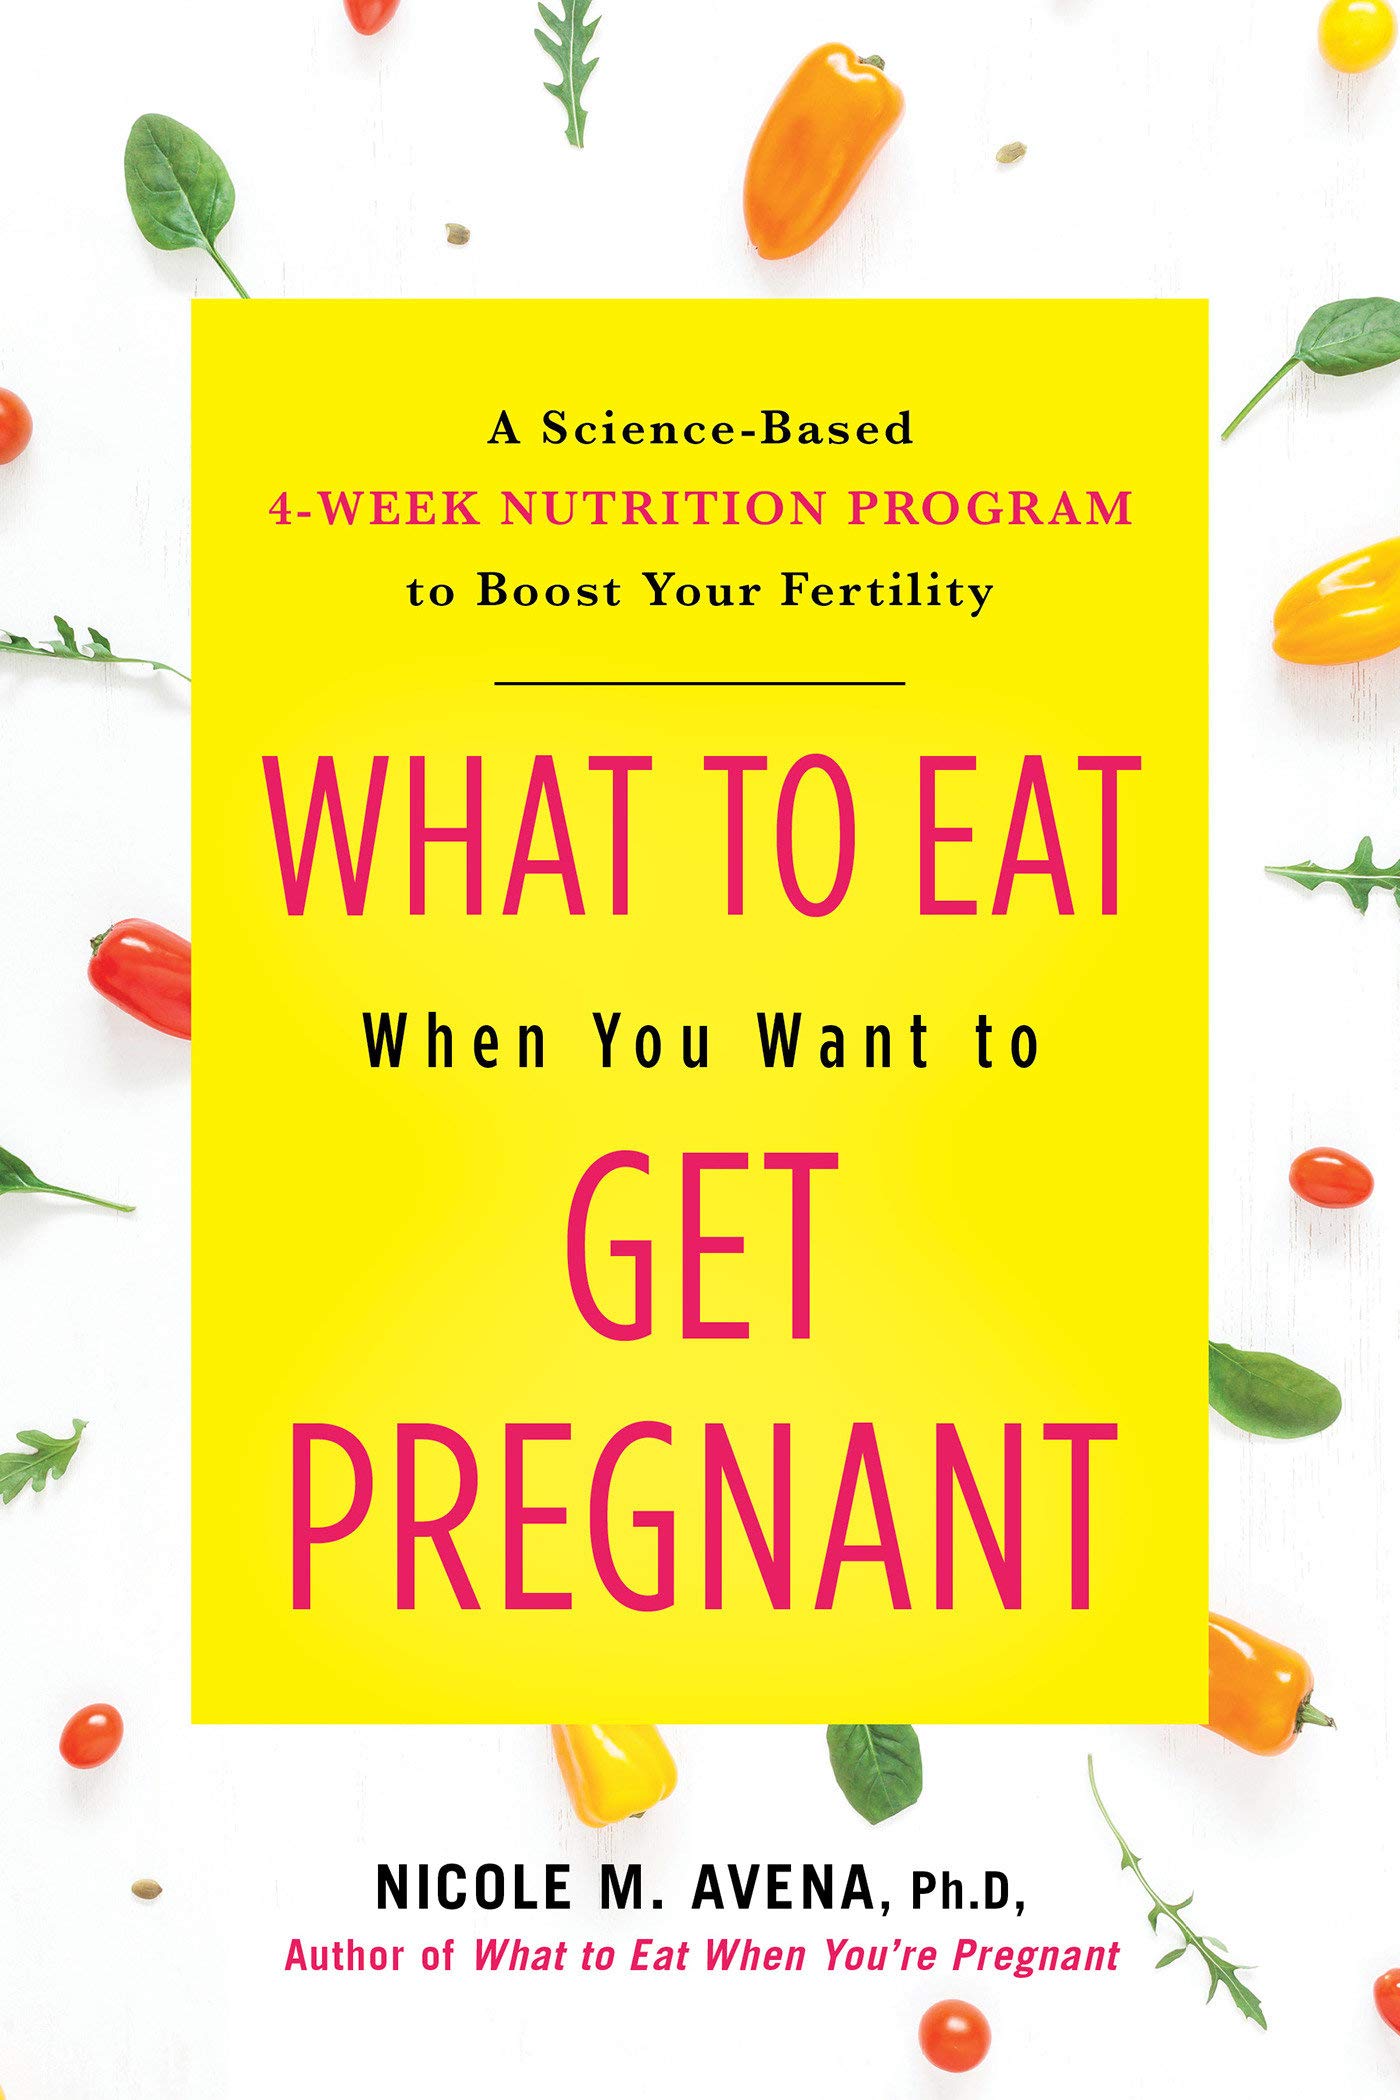 What to Eat When You Want to Get Pregnant: A Science-based 4-week Program to Boost Your Fertility with Nutrition